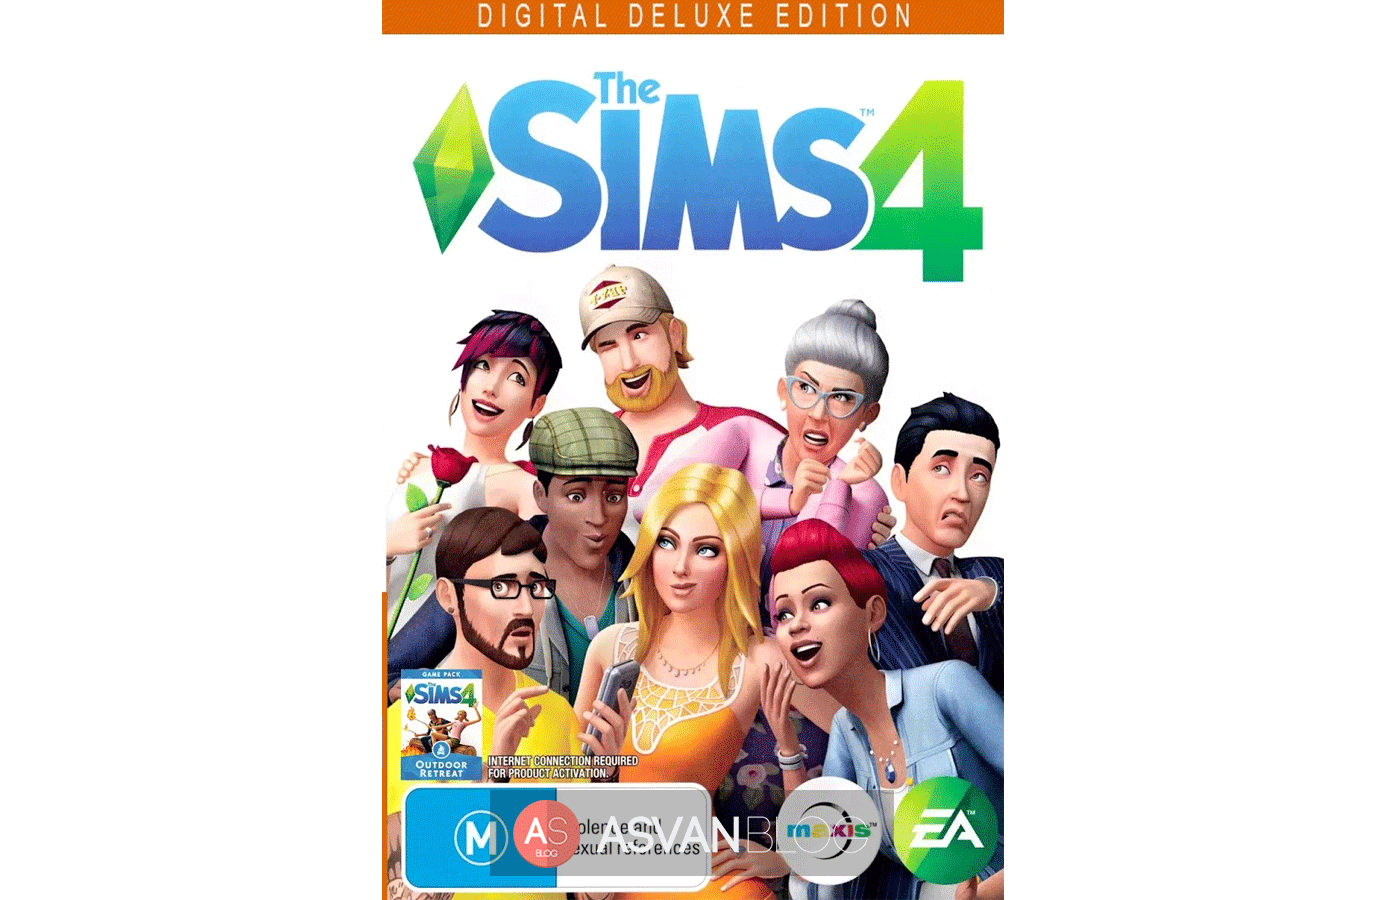 The Sims 4 Download Game PC DELUXE EDITION Crack